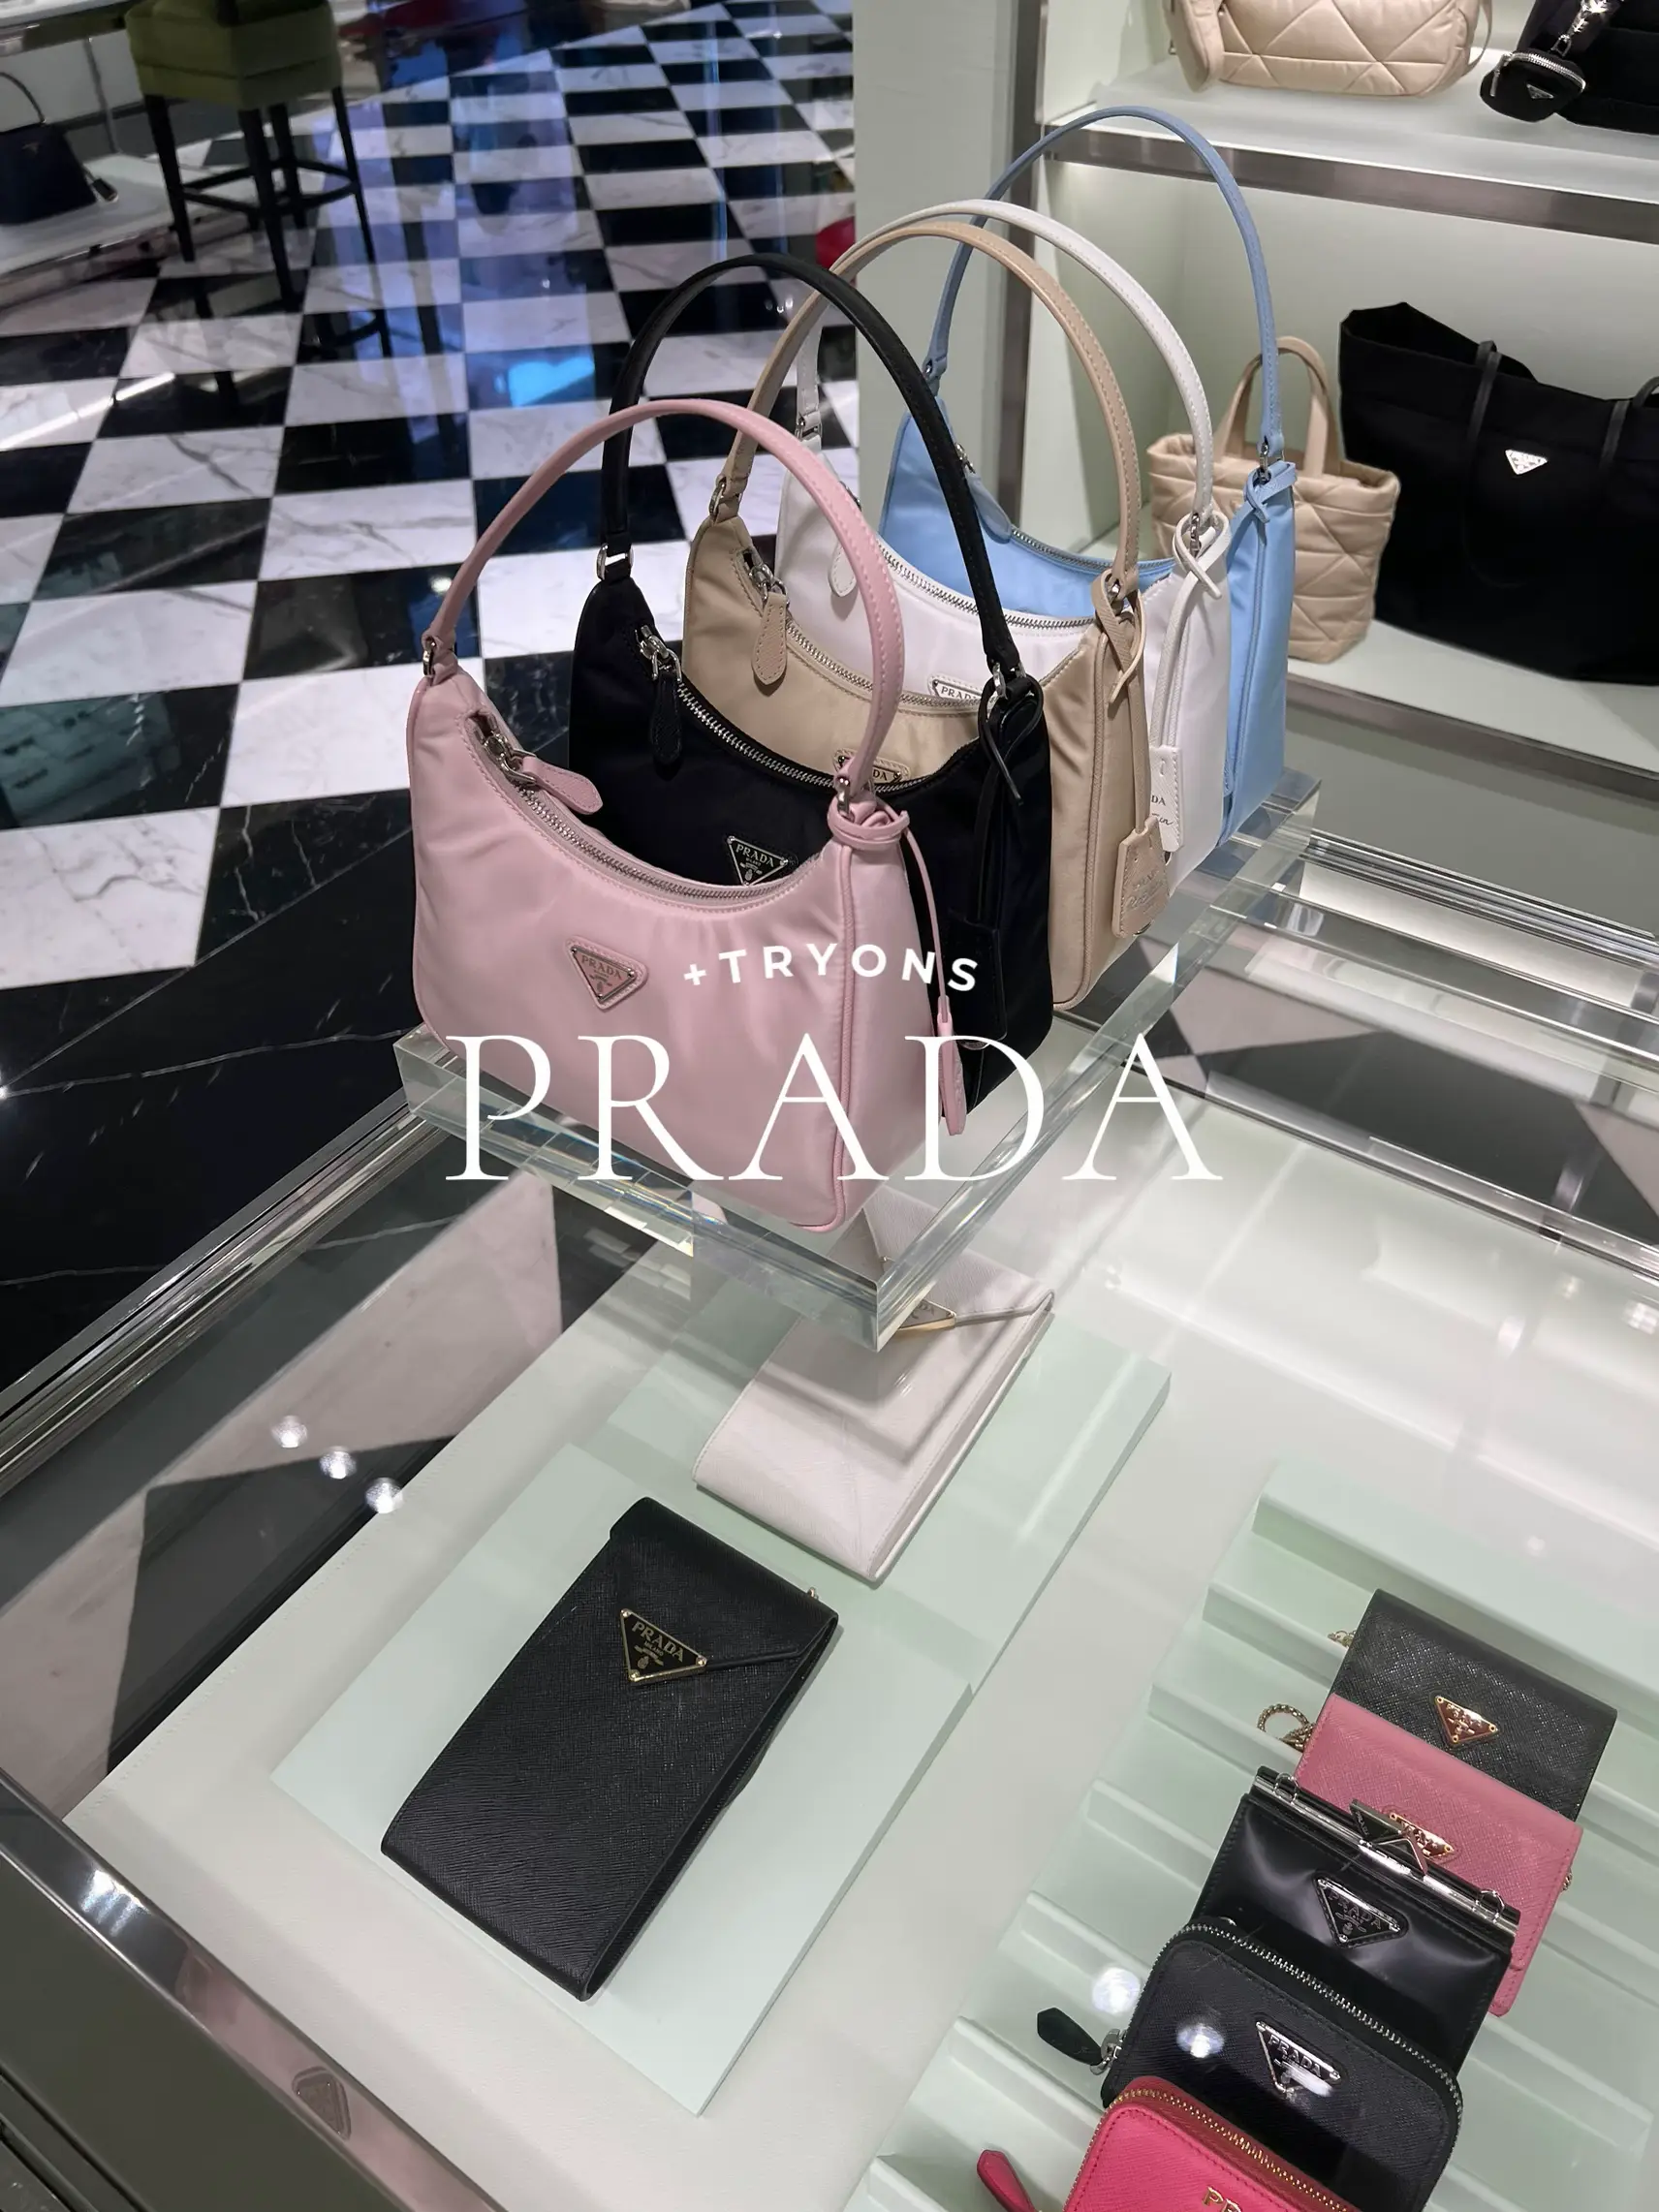 X 上的 Bellissima Lebailly：「#mood right now is #shopping #shoppingbags  #shopaholic #brand #luxury #expensive product #vip #Chanel #Dior #Sephora  #Prada #Versace #MetGala #Cannes #euro #dollarvS #instagram #twitter  #fashion #fashionblo